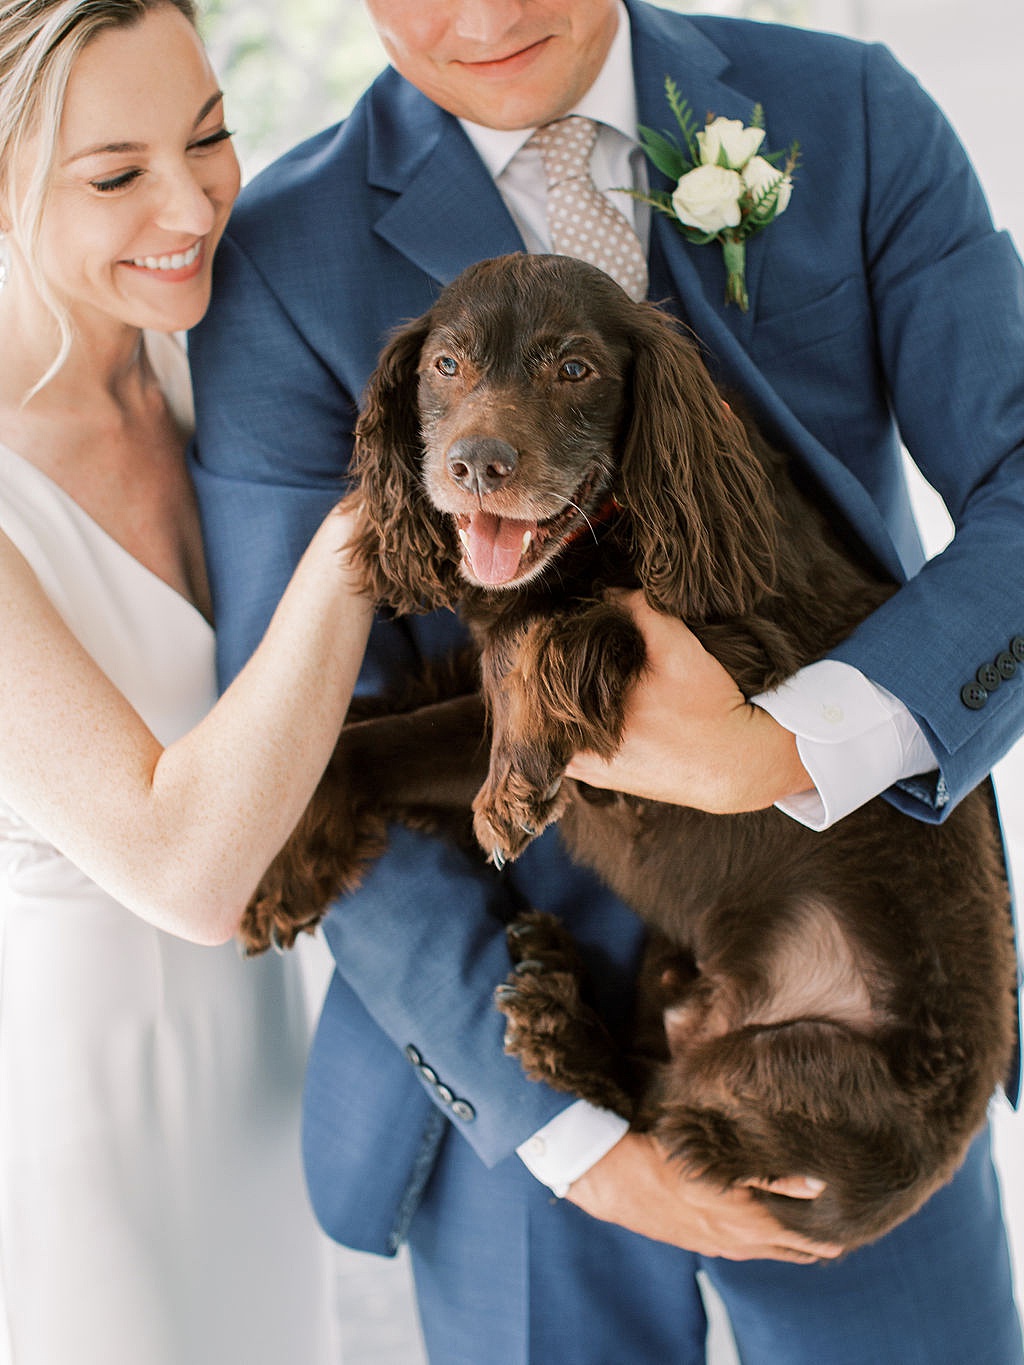 Bride and groom with their dog